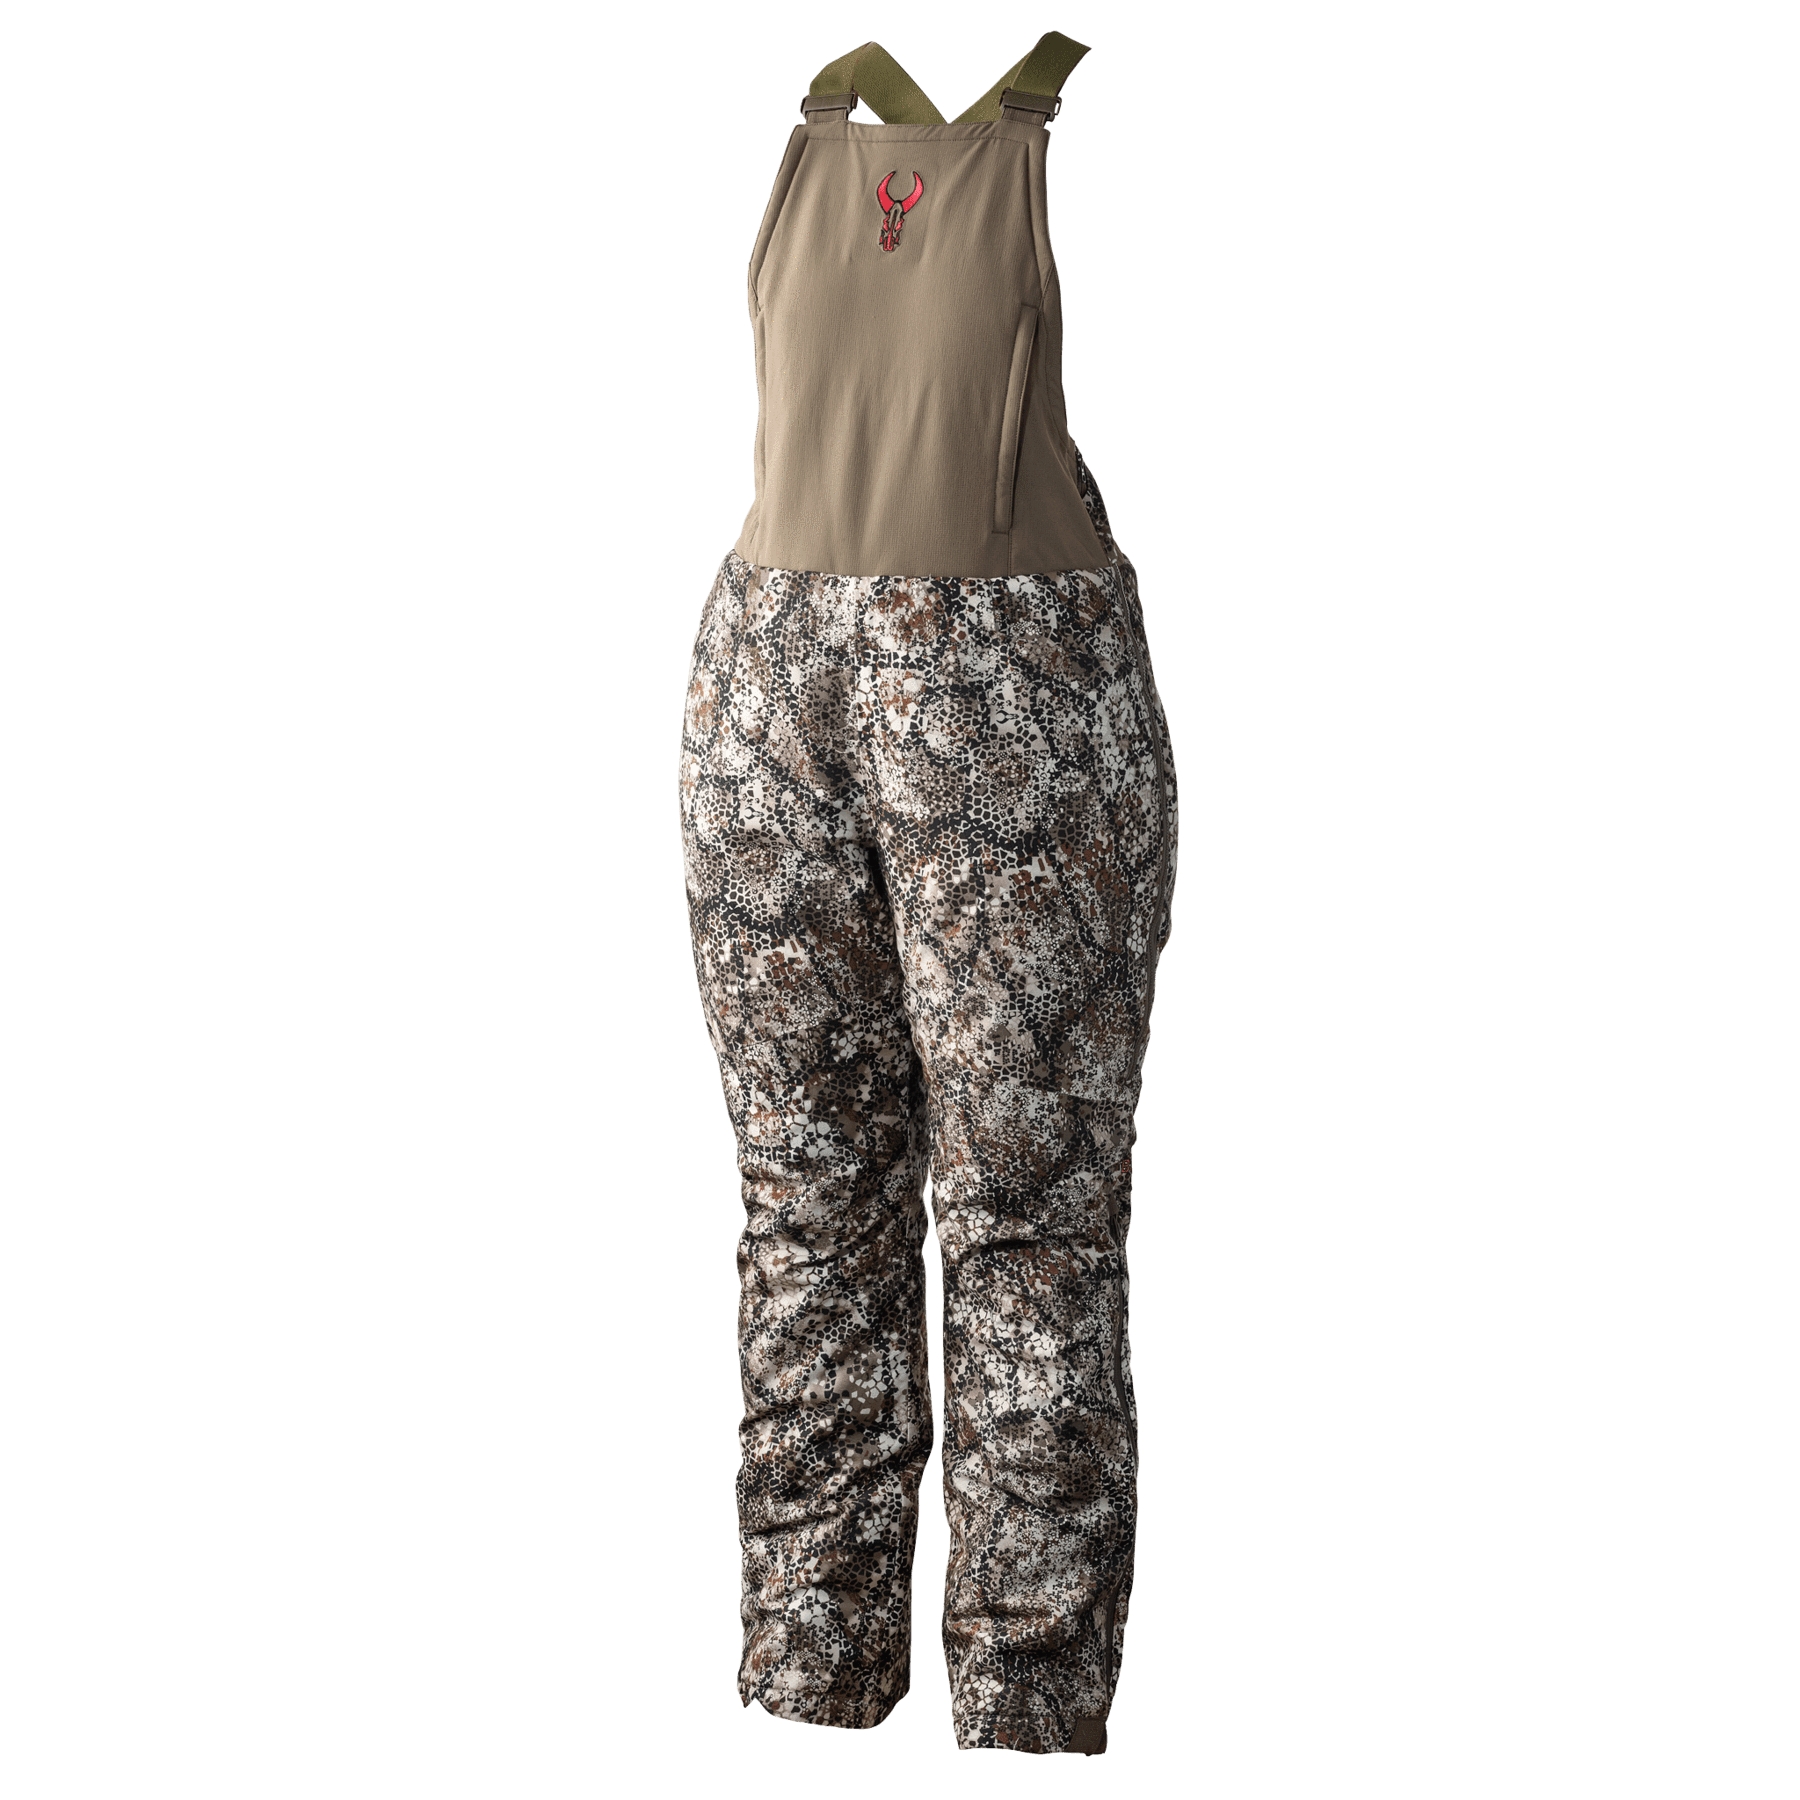 Badlands Pyre Bib - Women's - Leapfrog Outdoor Sports and Apparel